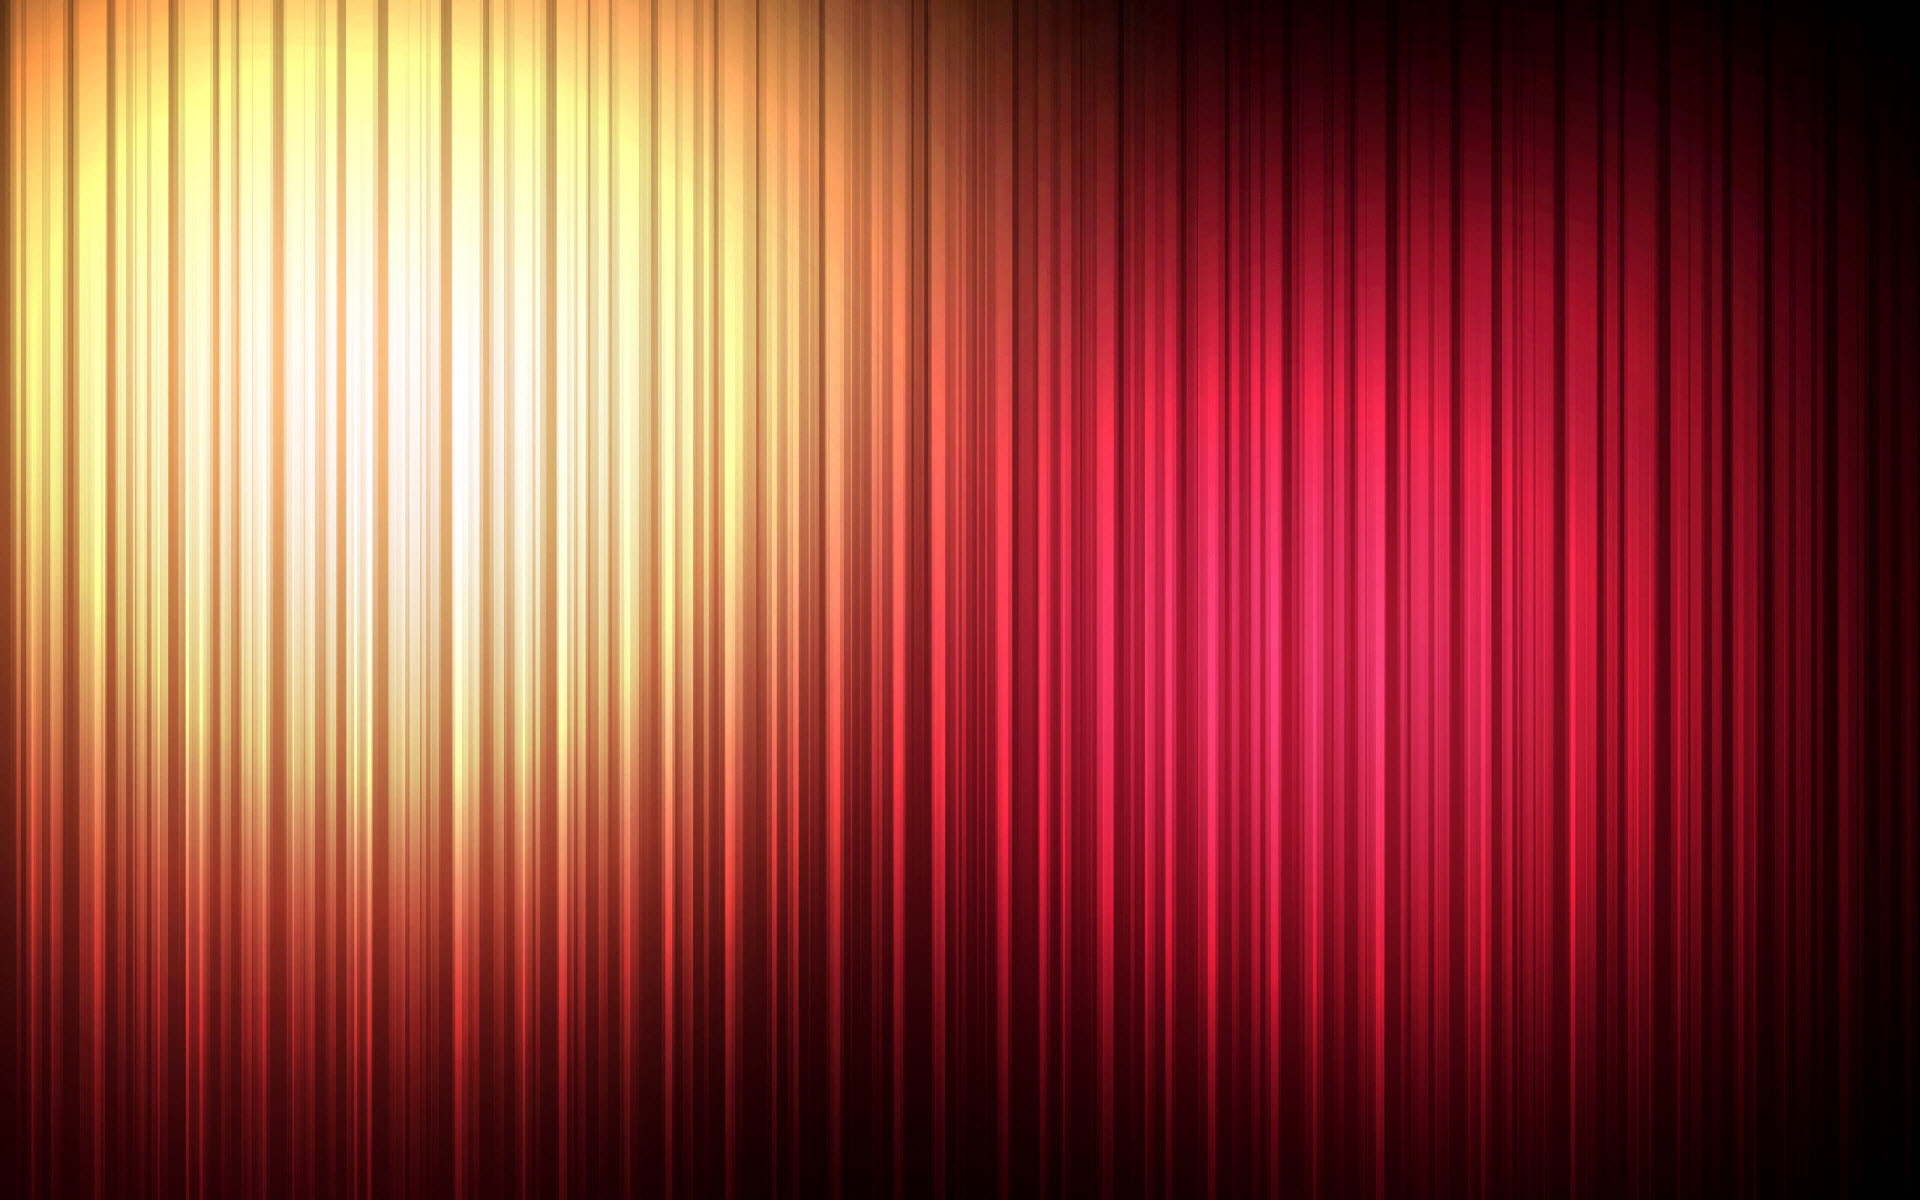 1920x1200 Free stock photos - Rgbstock - Free stock images | maroon ribbed .